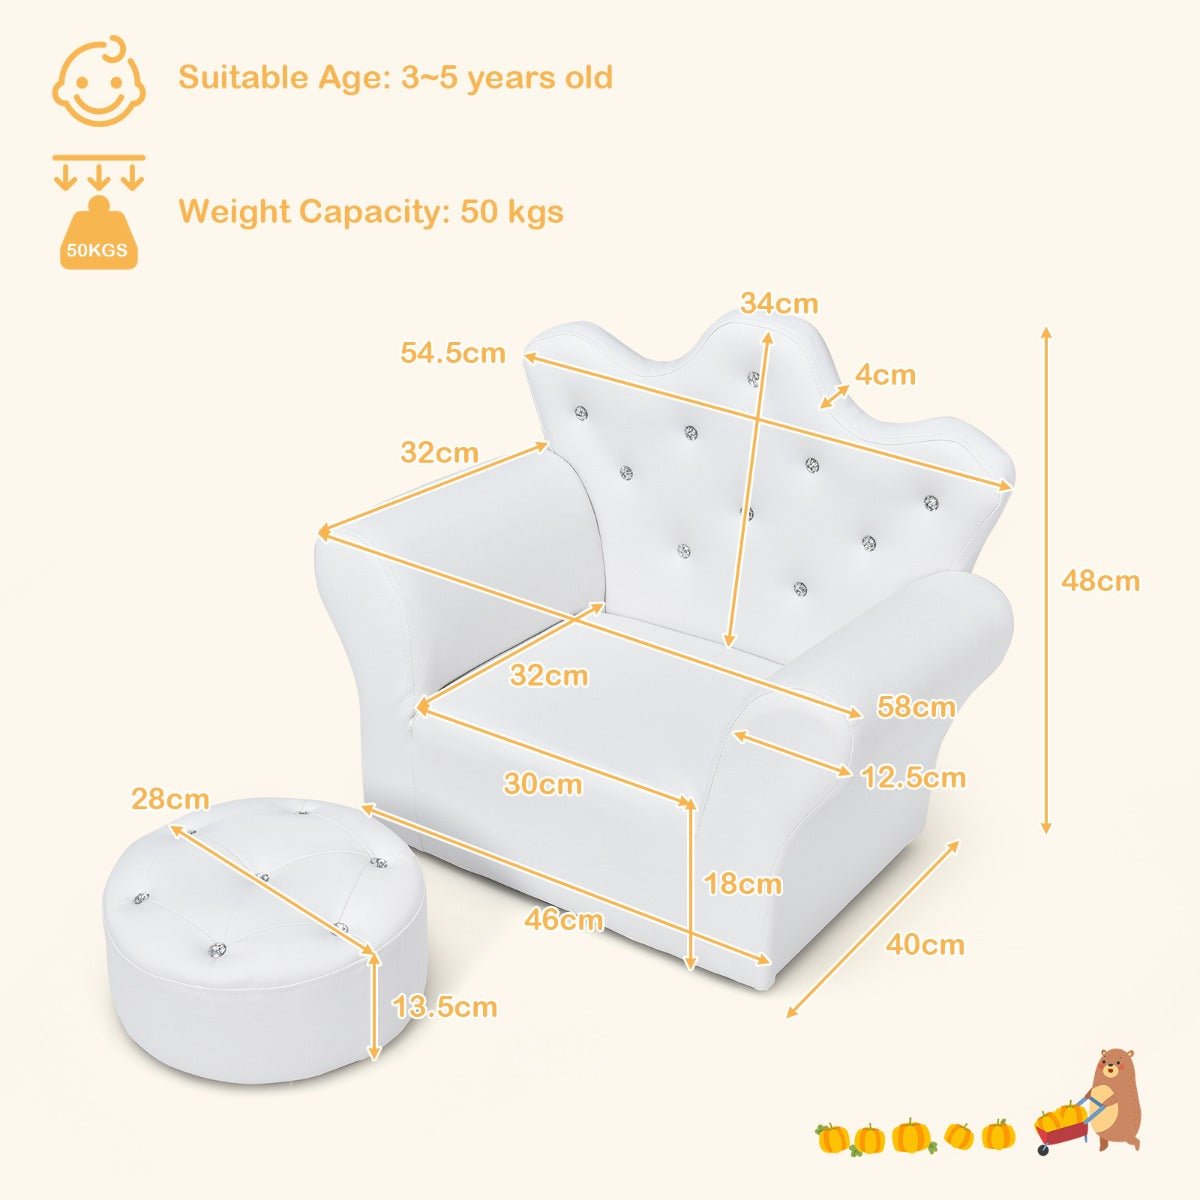 Kids Sofa with Crown-Shaped Backrest: Throne-Like Seating for Toddlers